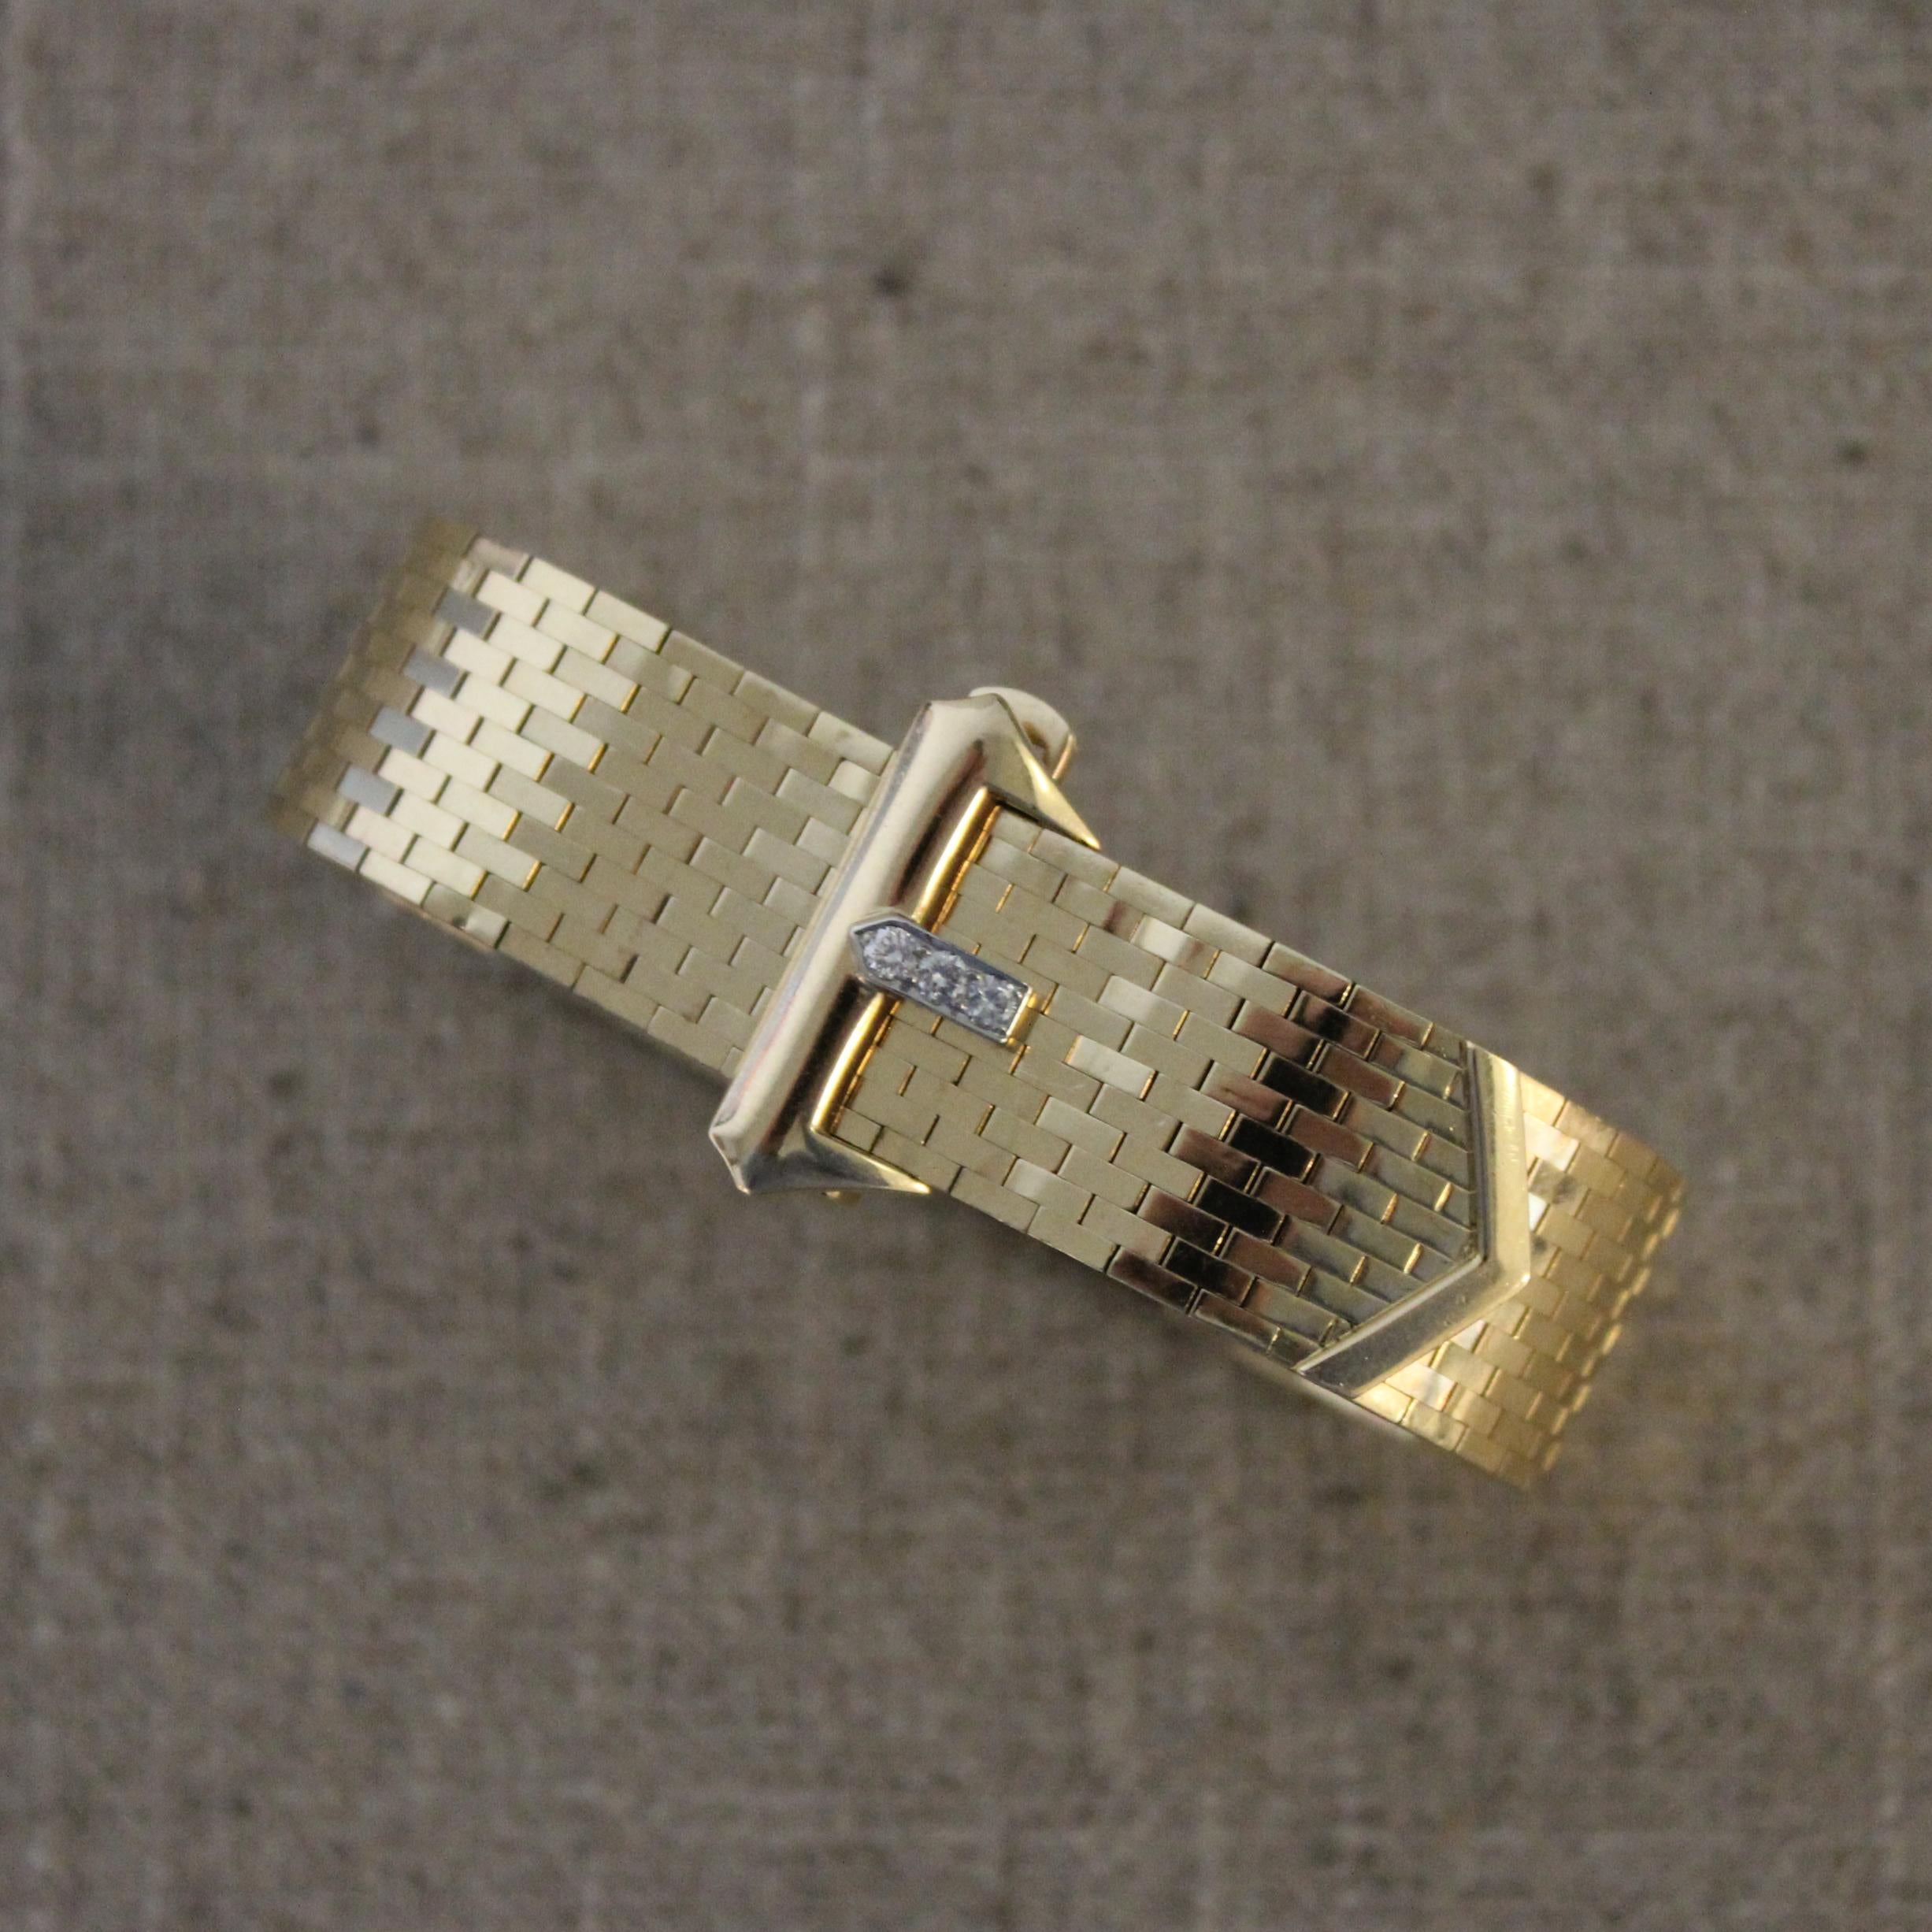 14 karat yellow gold Tiffany diamond Buckle bracelet. The bracelet is a soft gold mesh with flexibility featuring an adjustable diamond buckle clasp to fit perfectly to your wrist. The diamonds on the buckle weigh a total of .10 carats. 